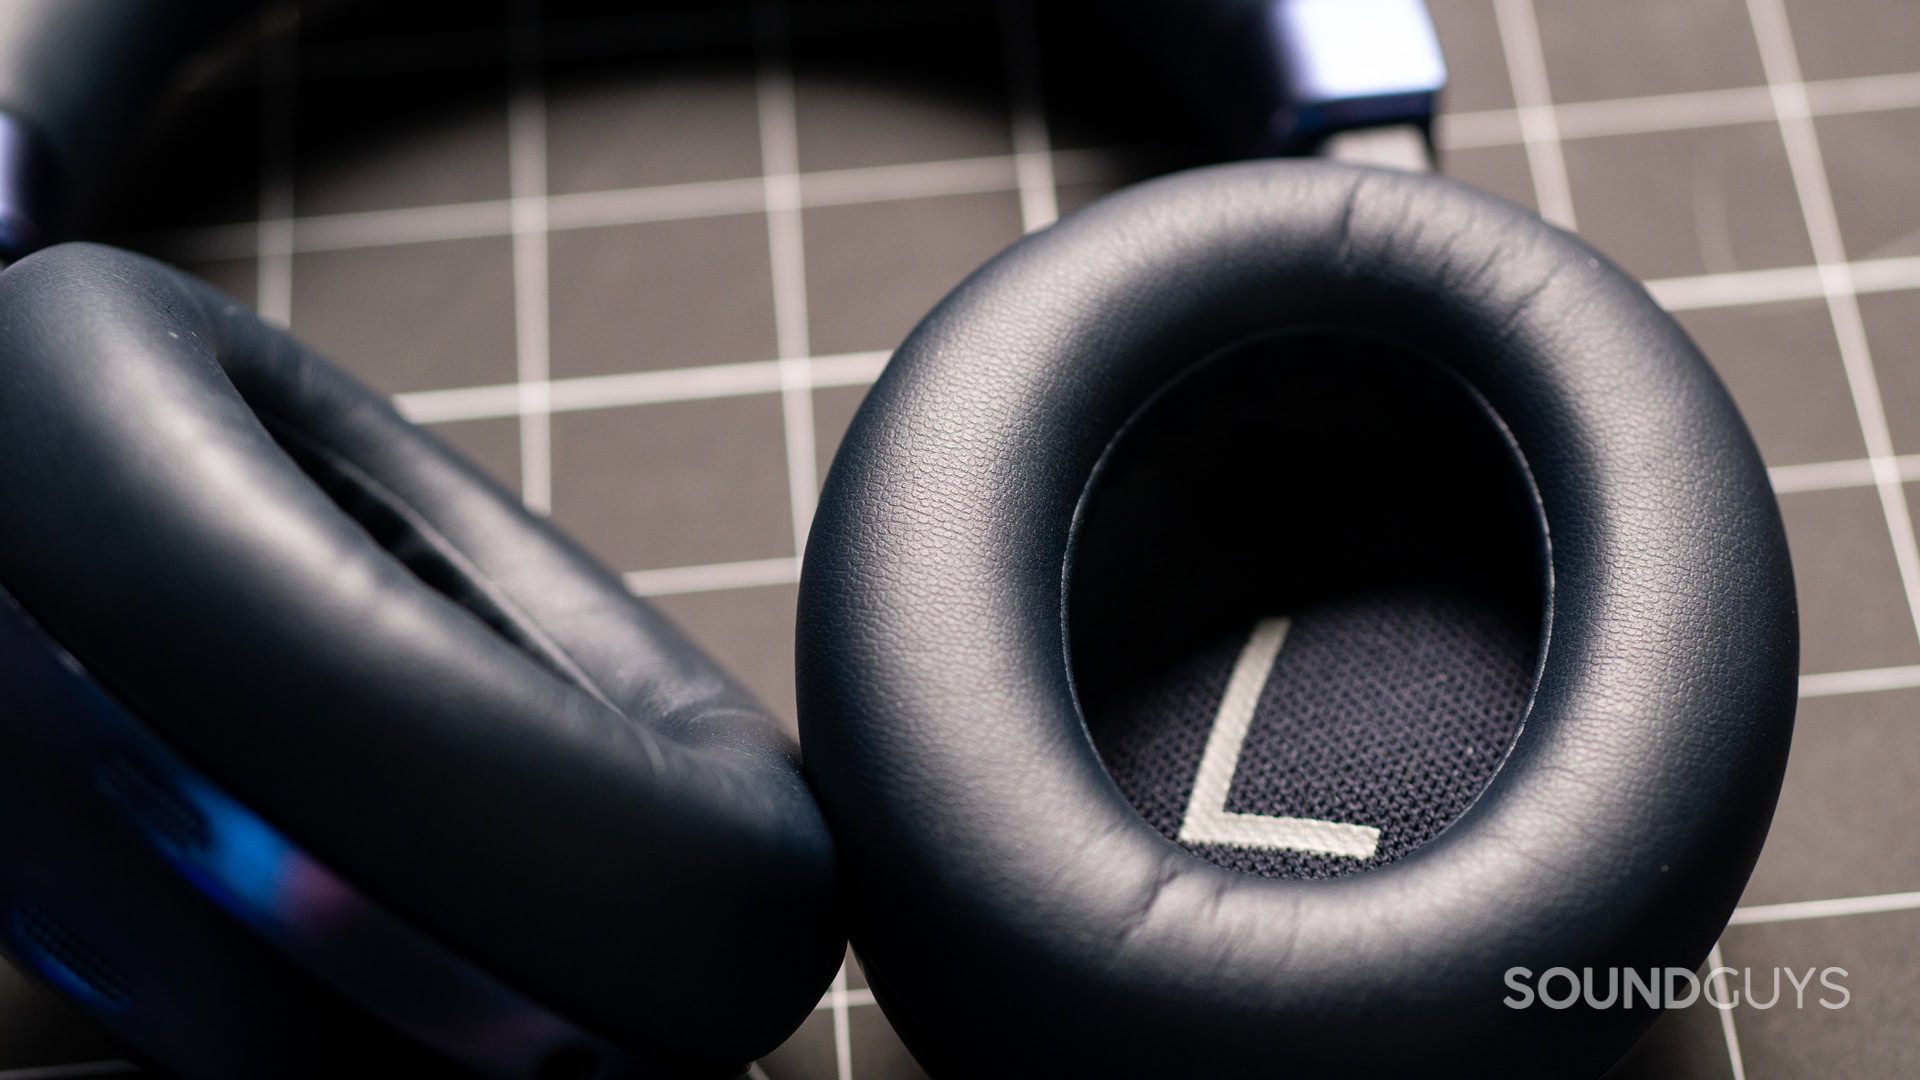 A close-up photo of the Raycon Everyday Headphones Pro's ear cups.